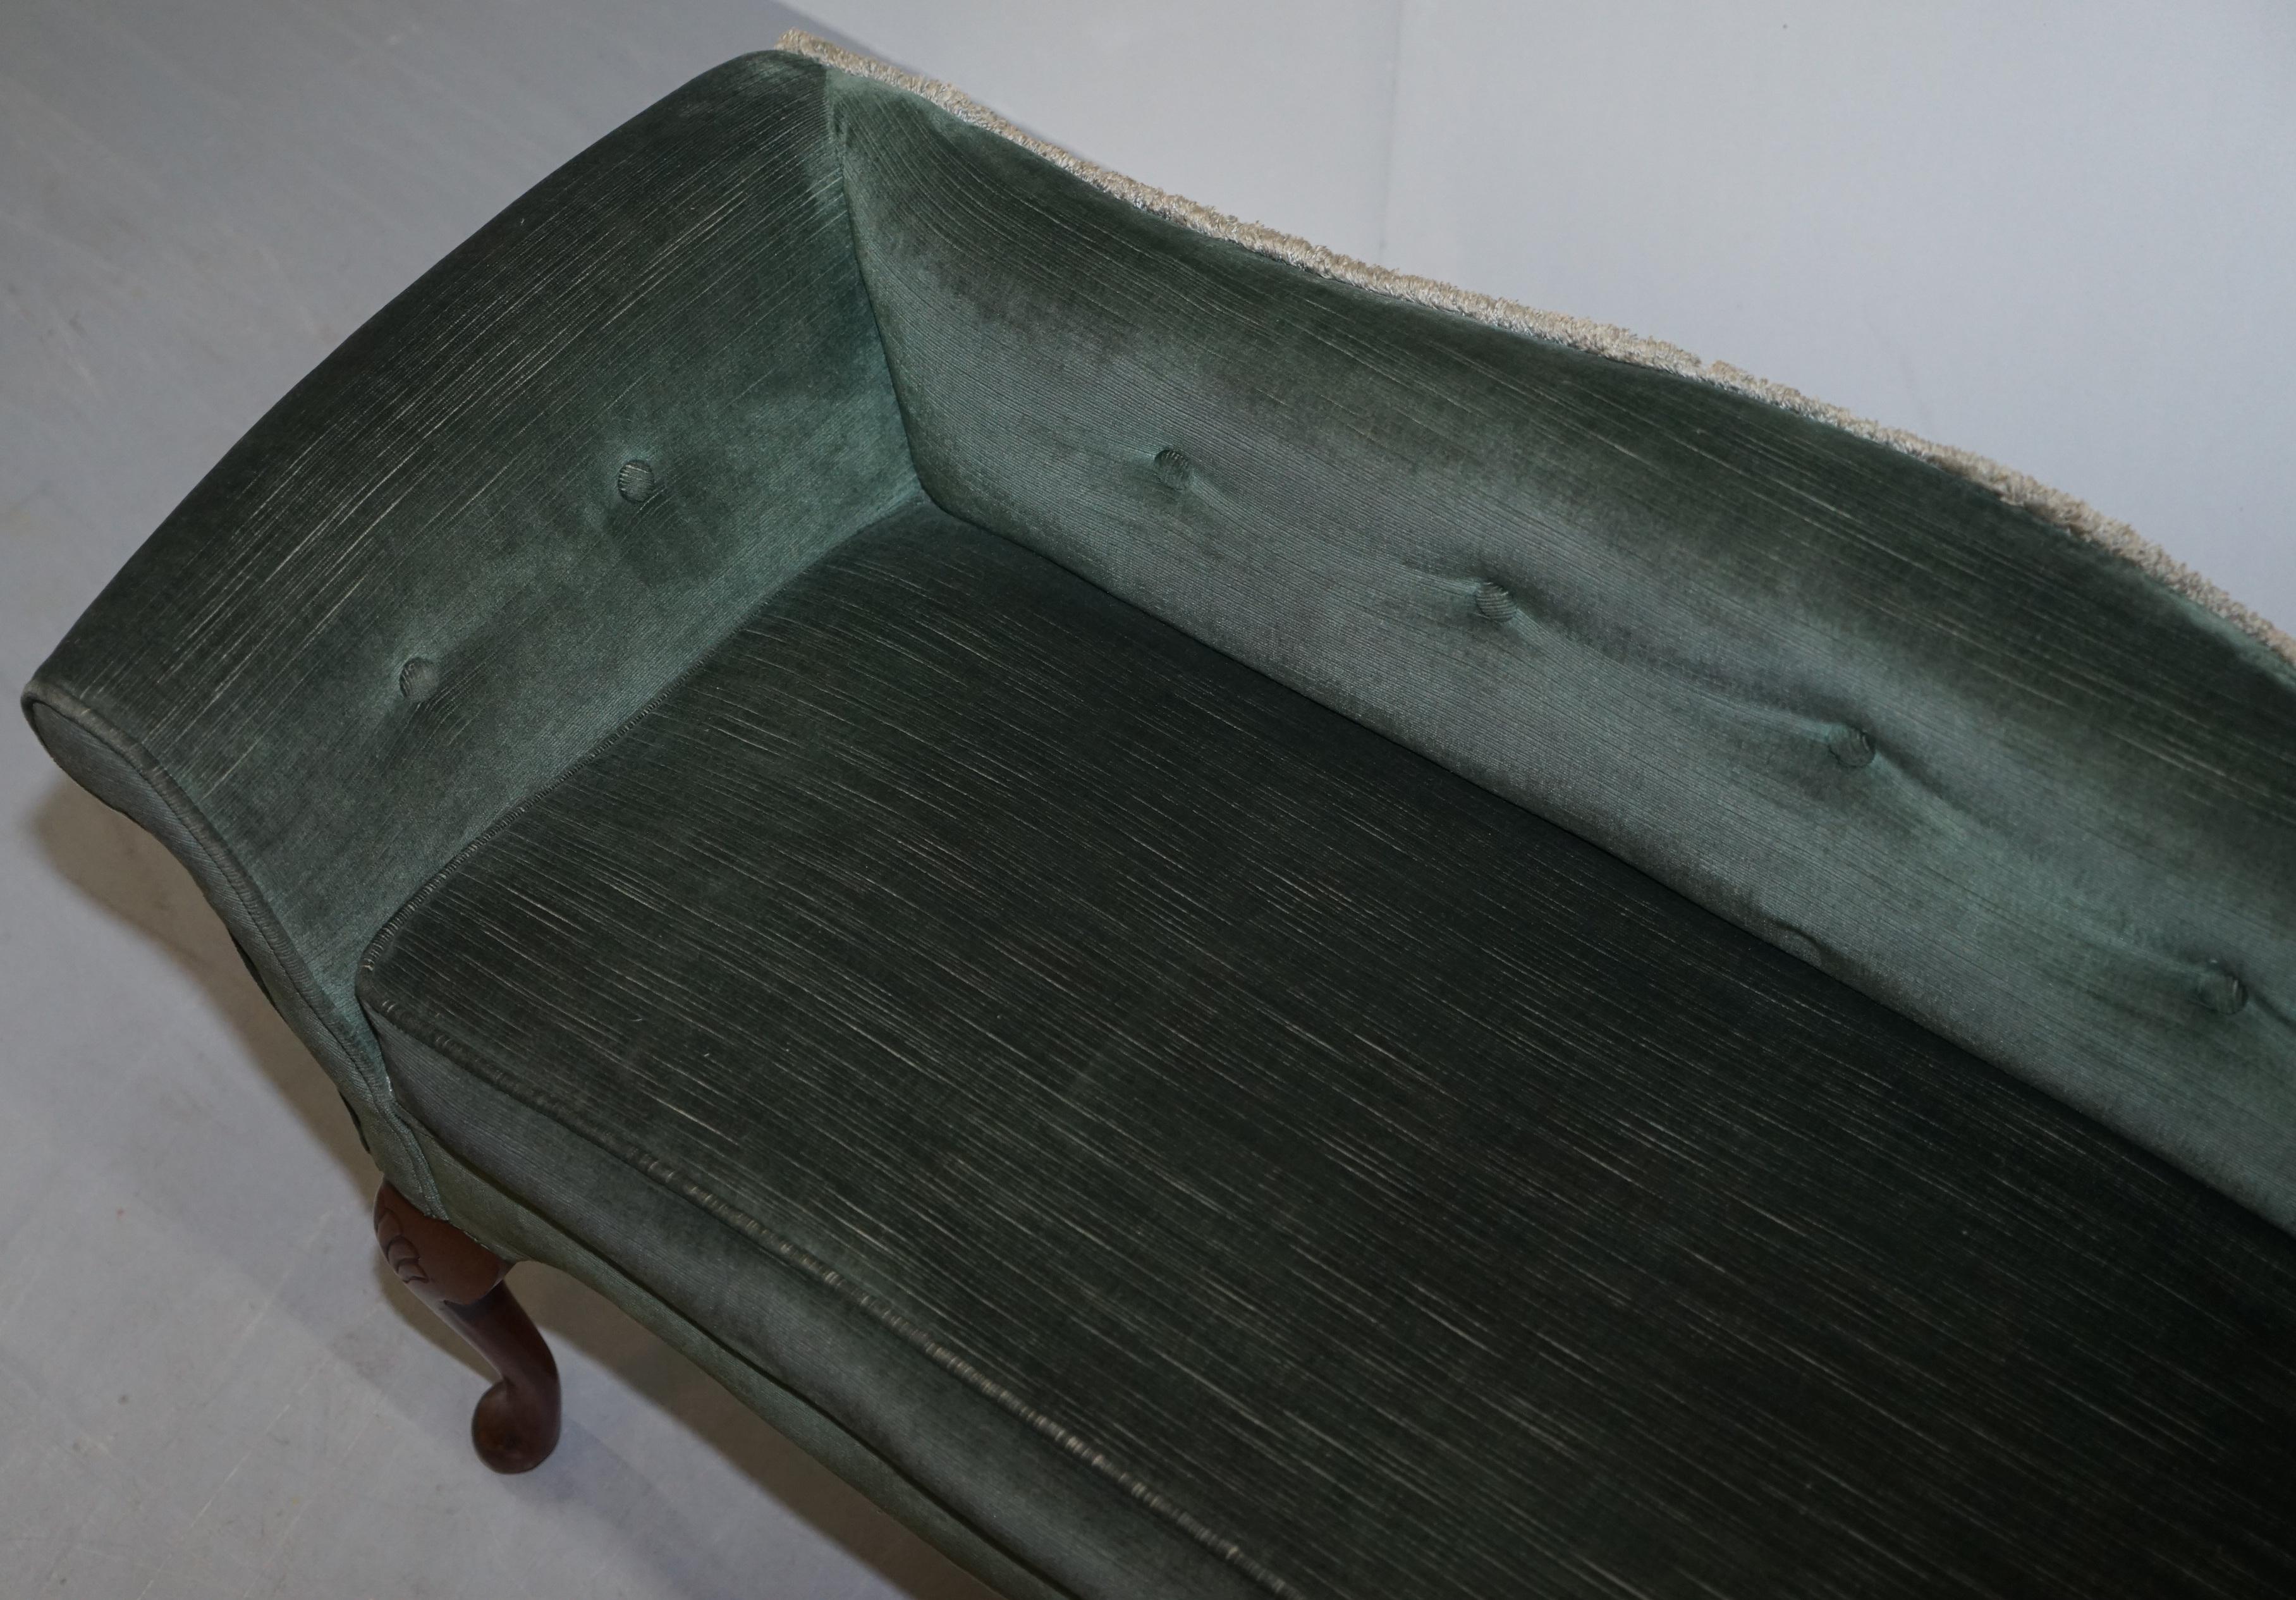 Hand-Crafted Very Small Window Seat Sofa, Victorian circa 1880 Based on Early Georgian Design